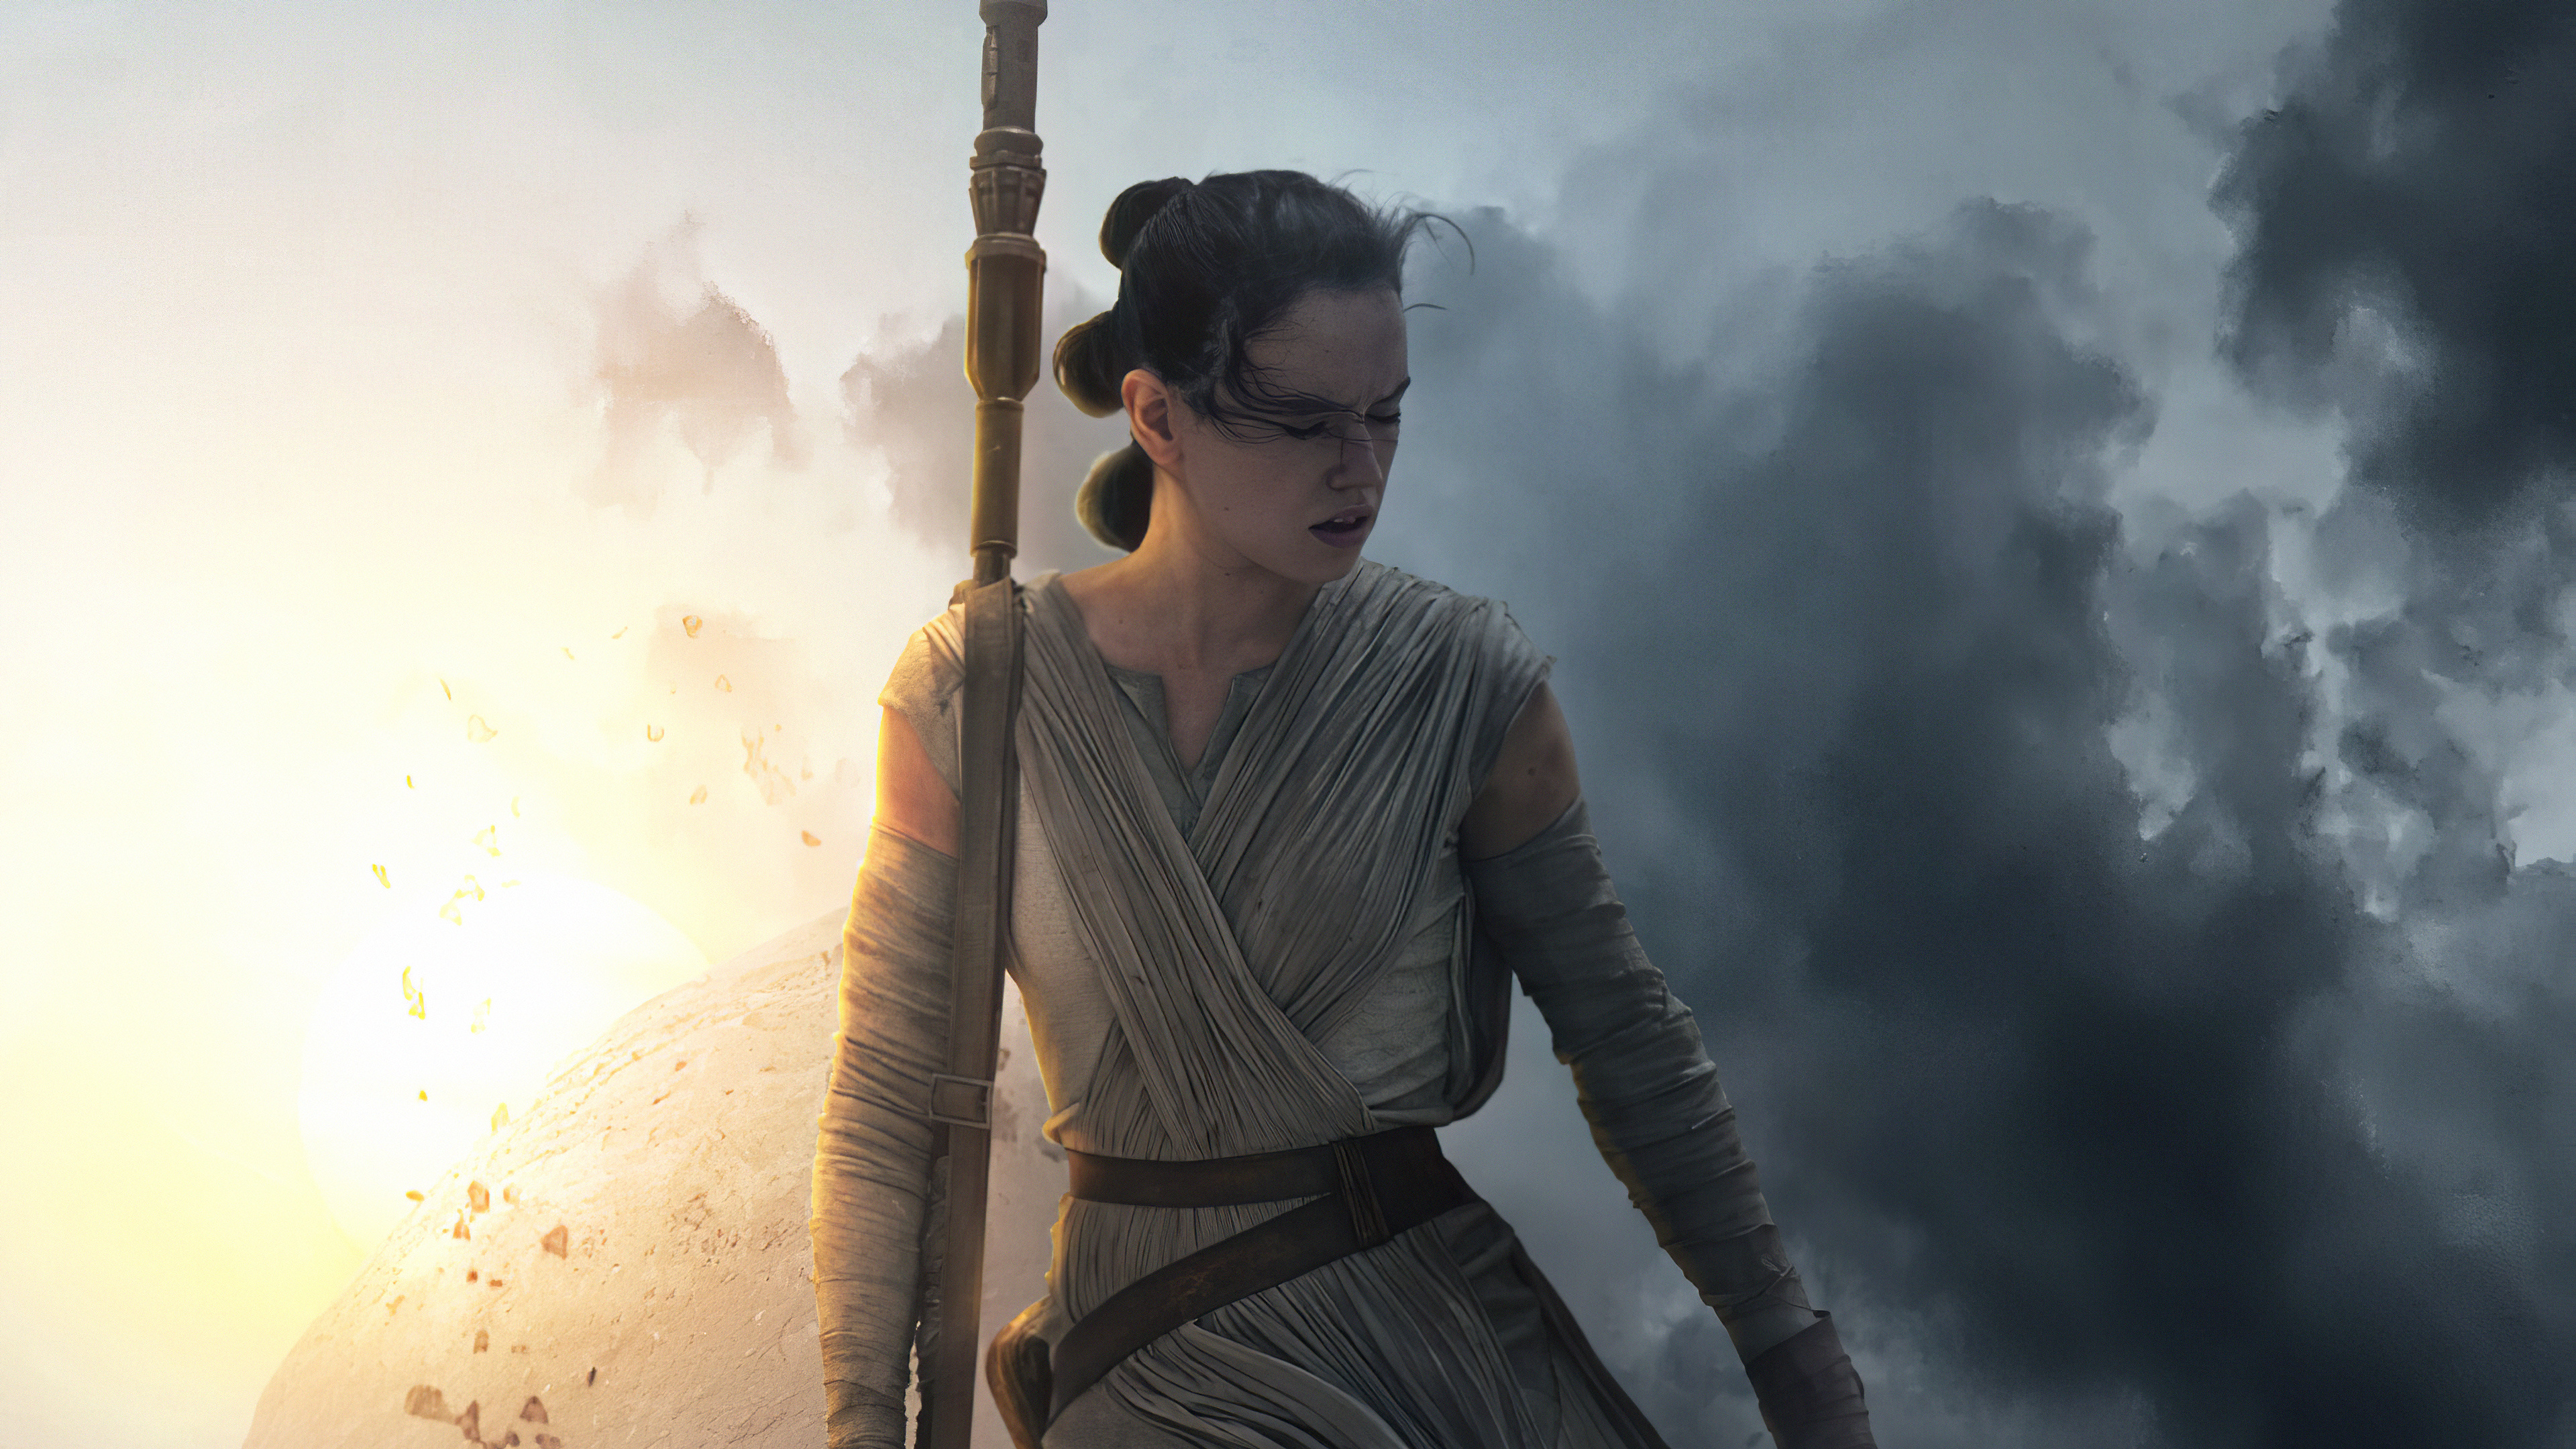 Star Wars: The Rise Of Skywalker: Daisy Ridley as Rey, the paternal granddaughter of Palpatine, and the last Jedi. 3840x2160 4K Wallpaper.